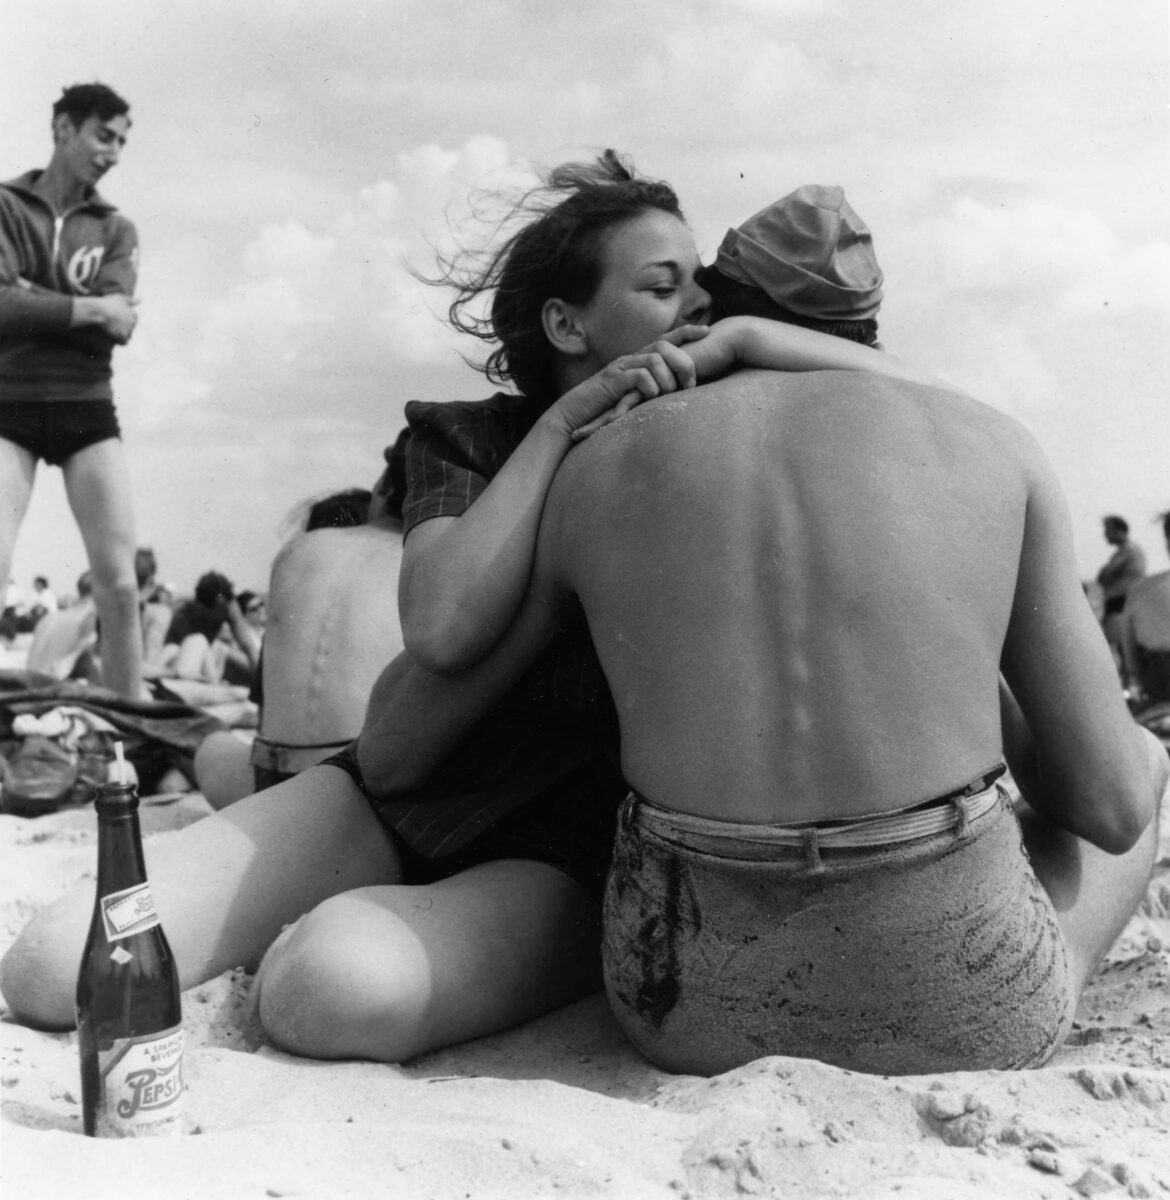 1938: A couple sitting embraces on a crowded beach.  Coney Island, Brooklyn.  New York, New York, 1938. 01/01/1938 Photo by Morris Engel/Getty Images